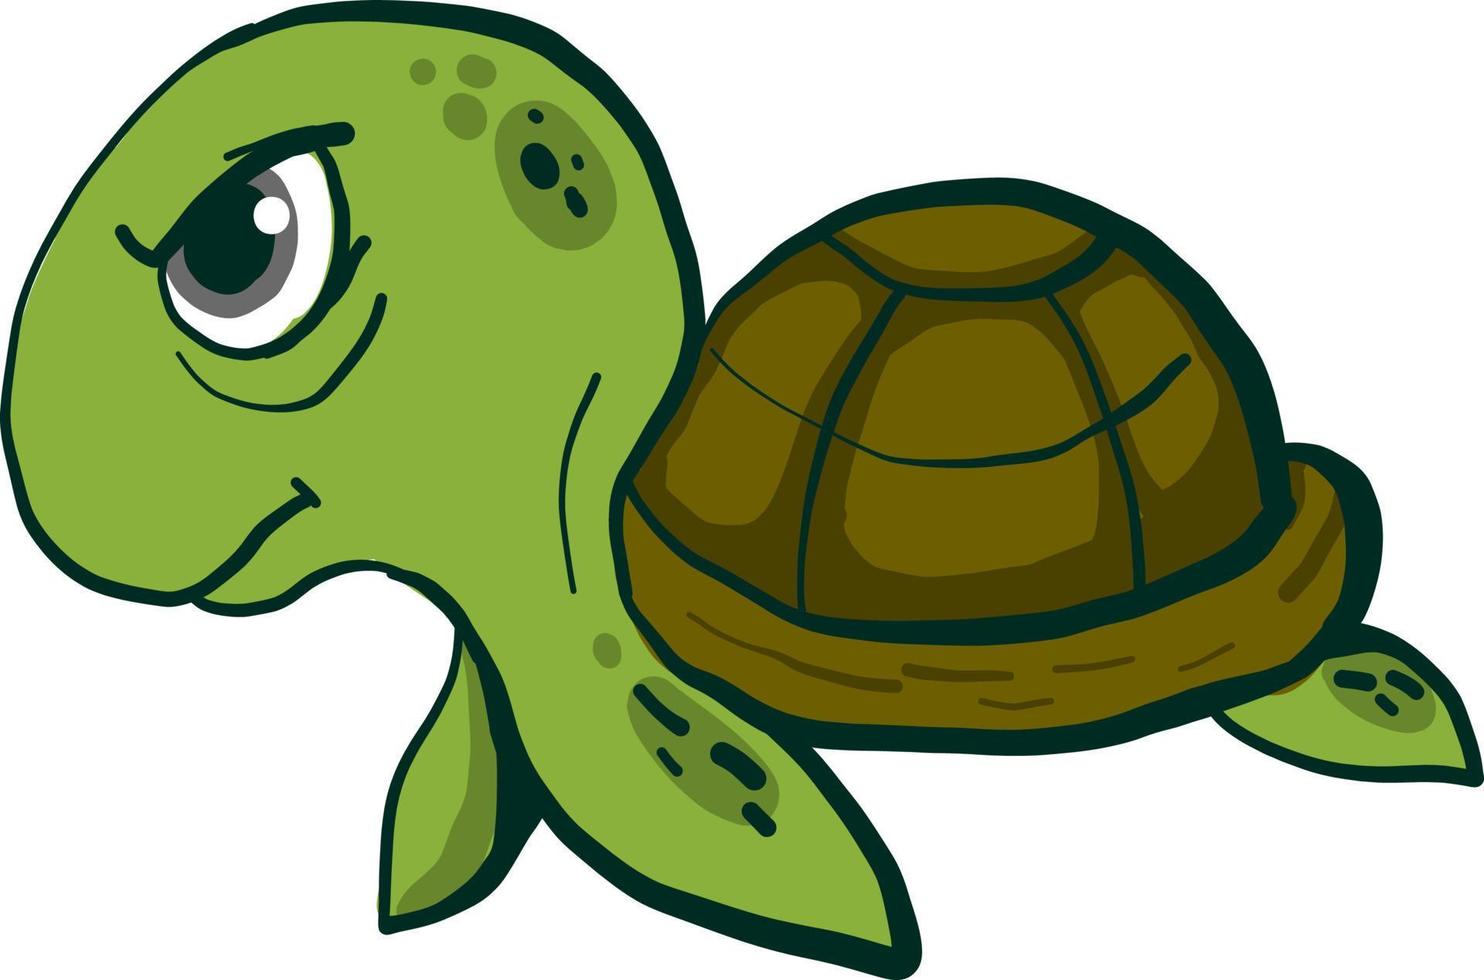 Angry turtle, illustration, vector on white background